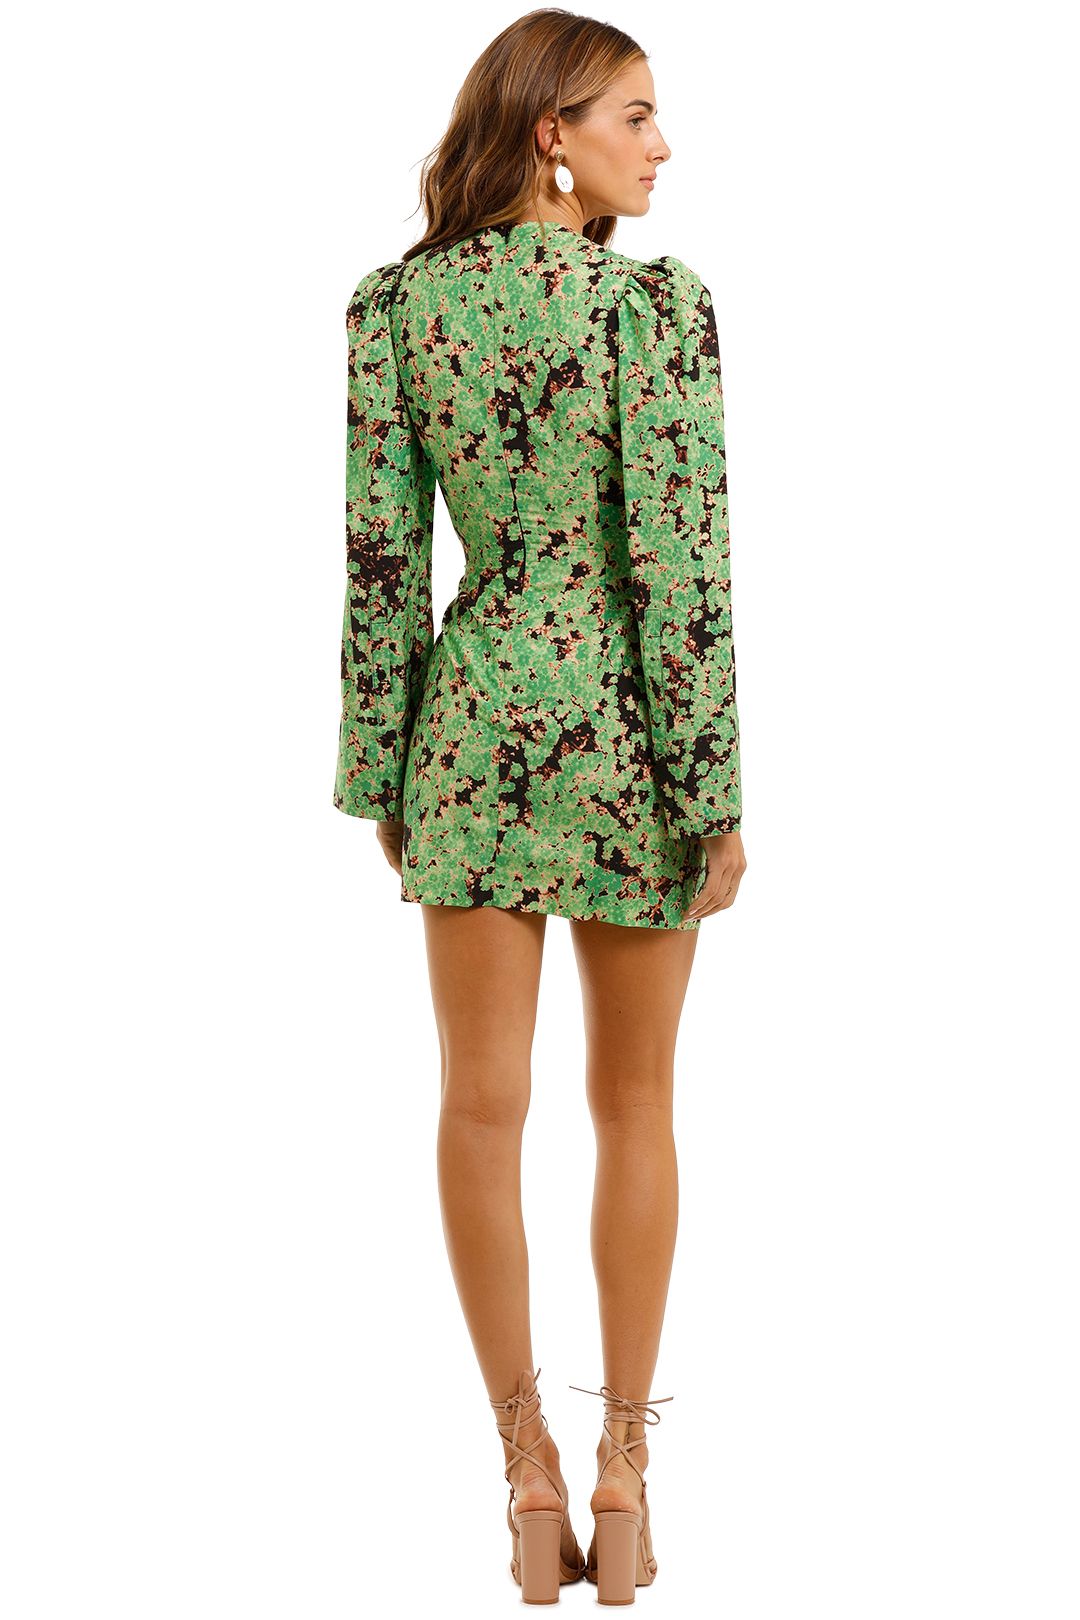 Camilla and Marc Oceo Mini Wrapdress floral green